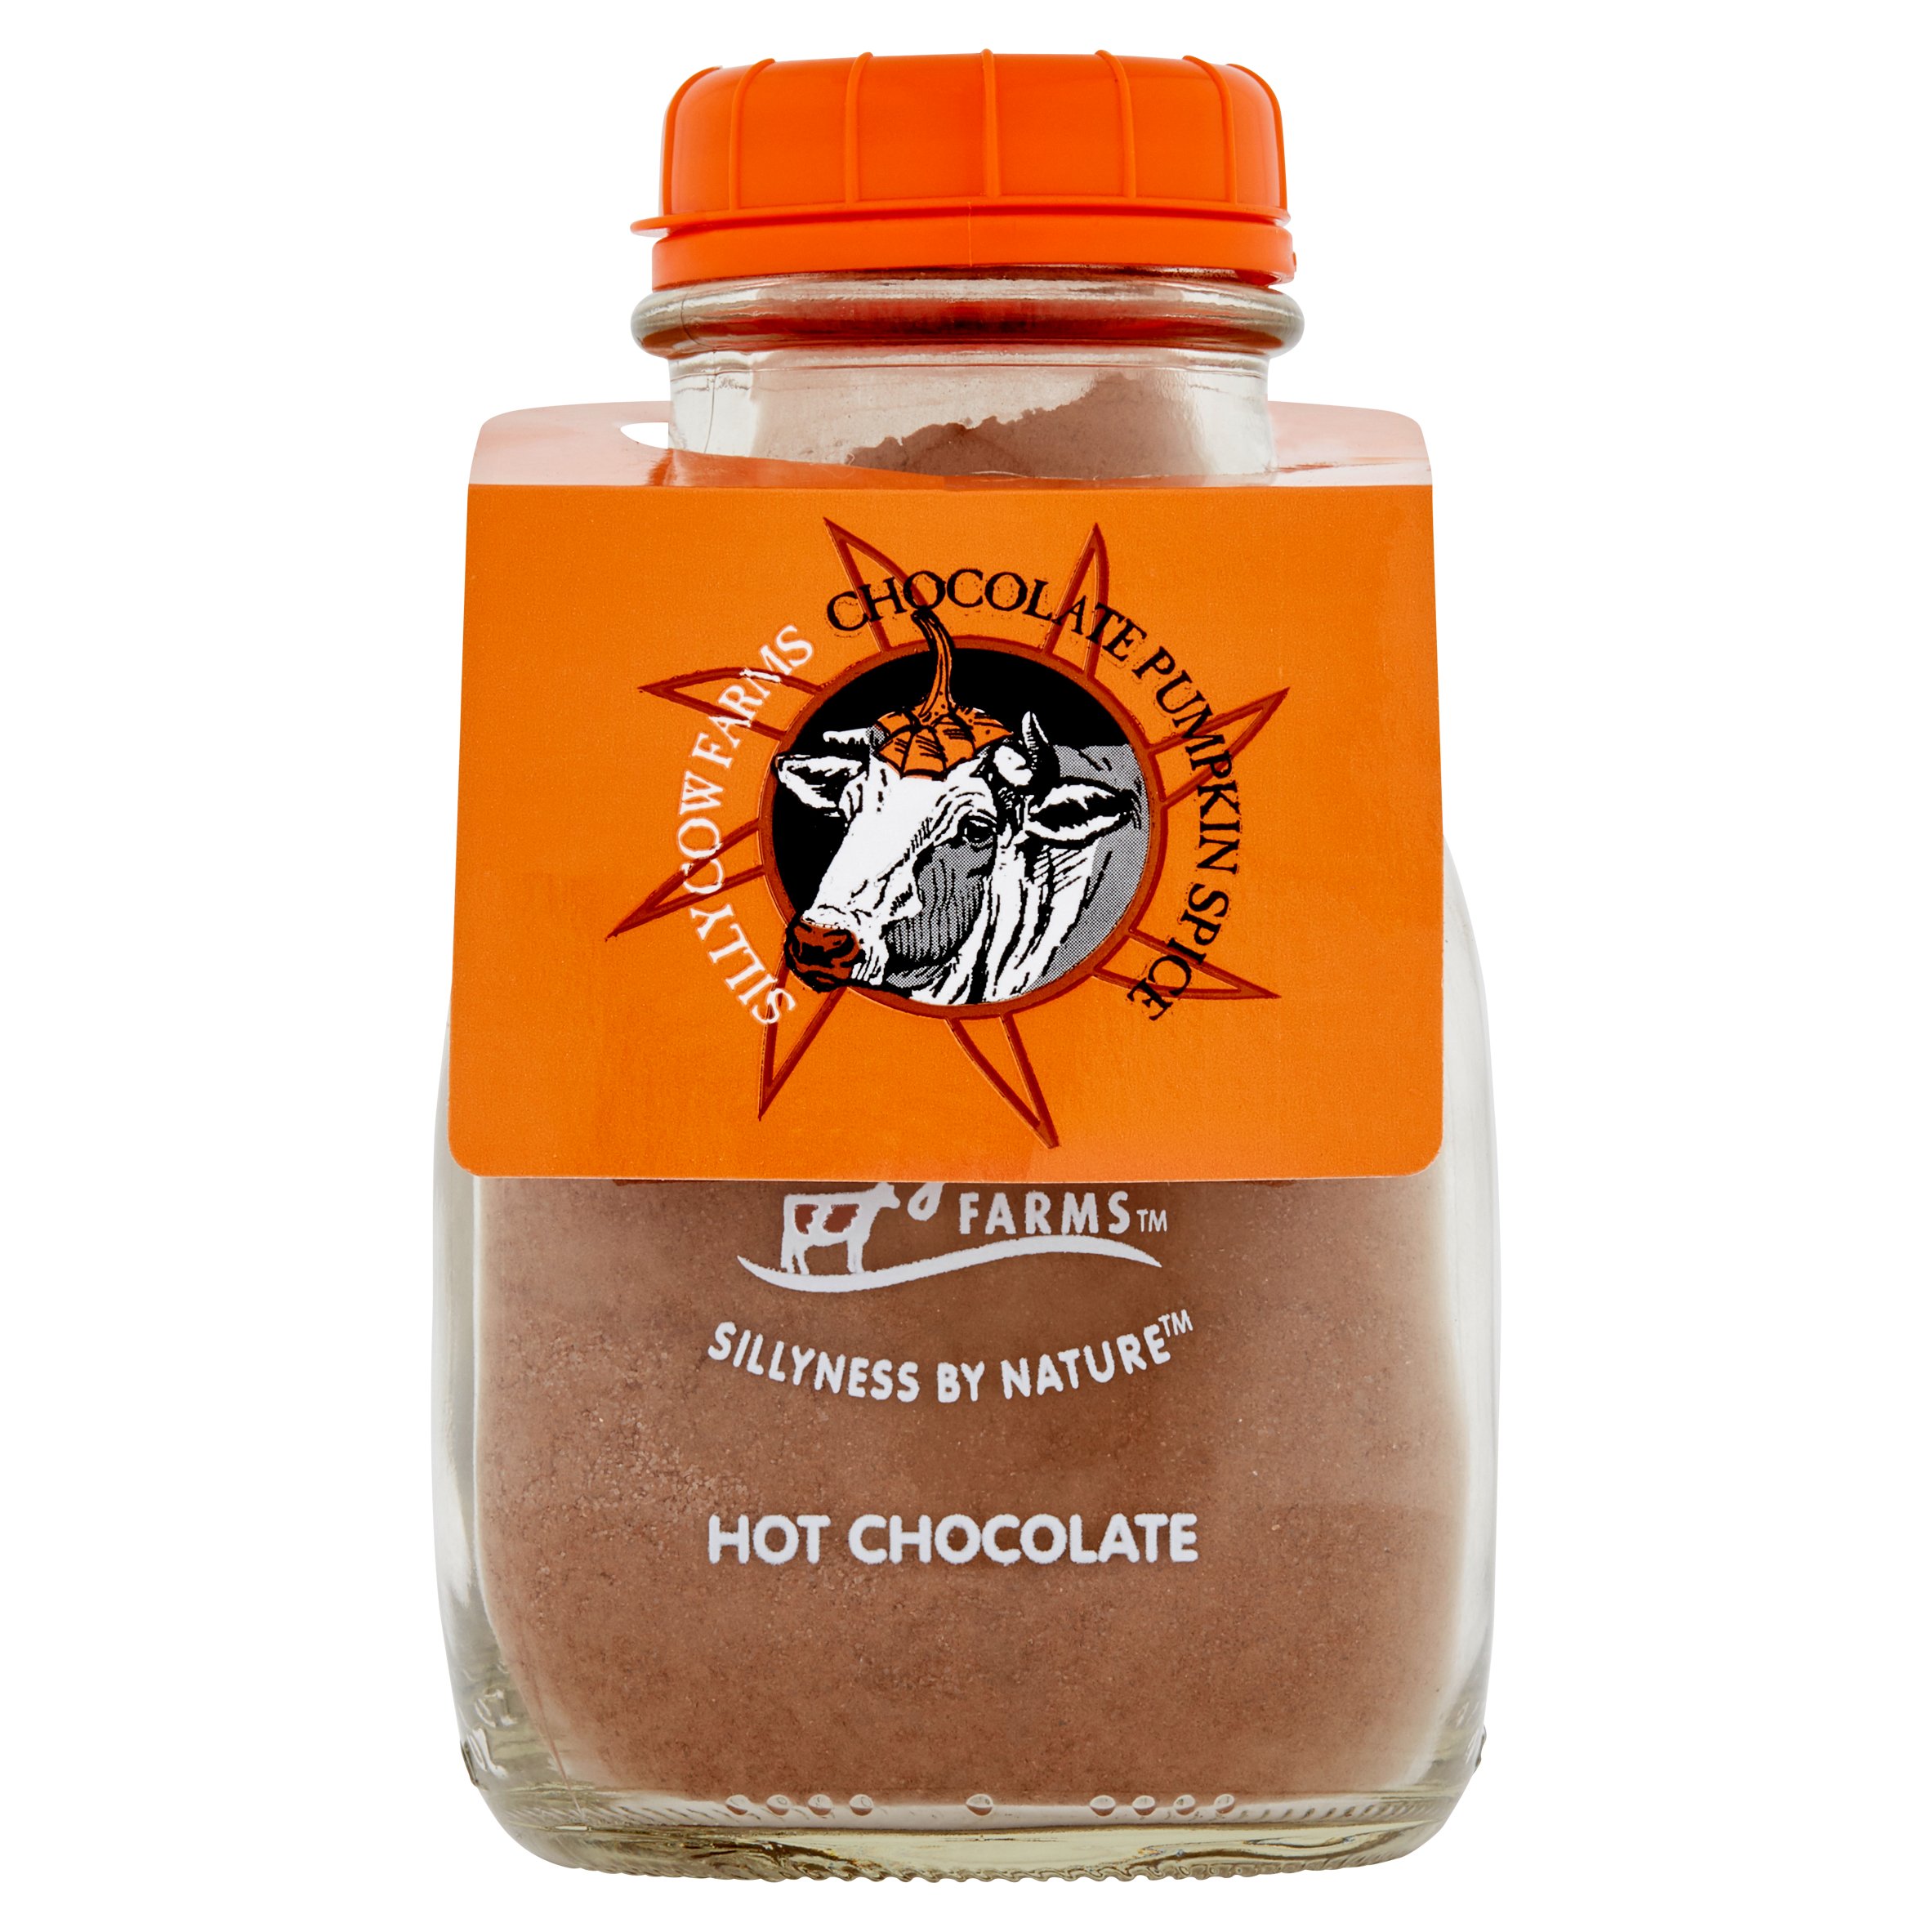 Sillycow Hot Cocoa Pmpkn Spce,16.9 Oz (Pack Of 6) - Walmart.com